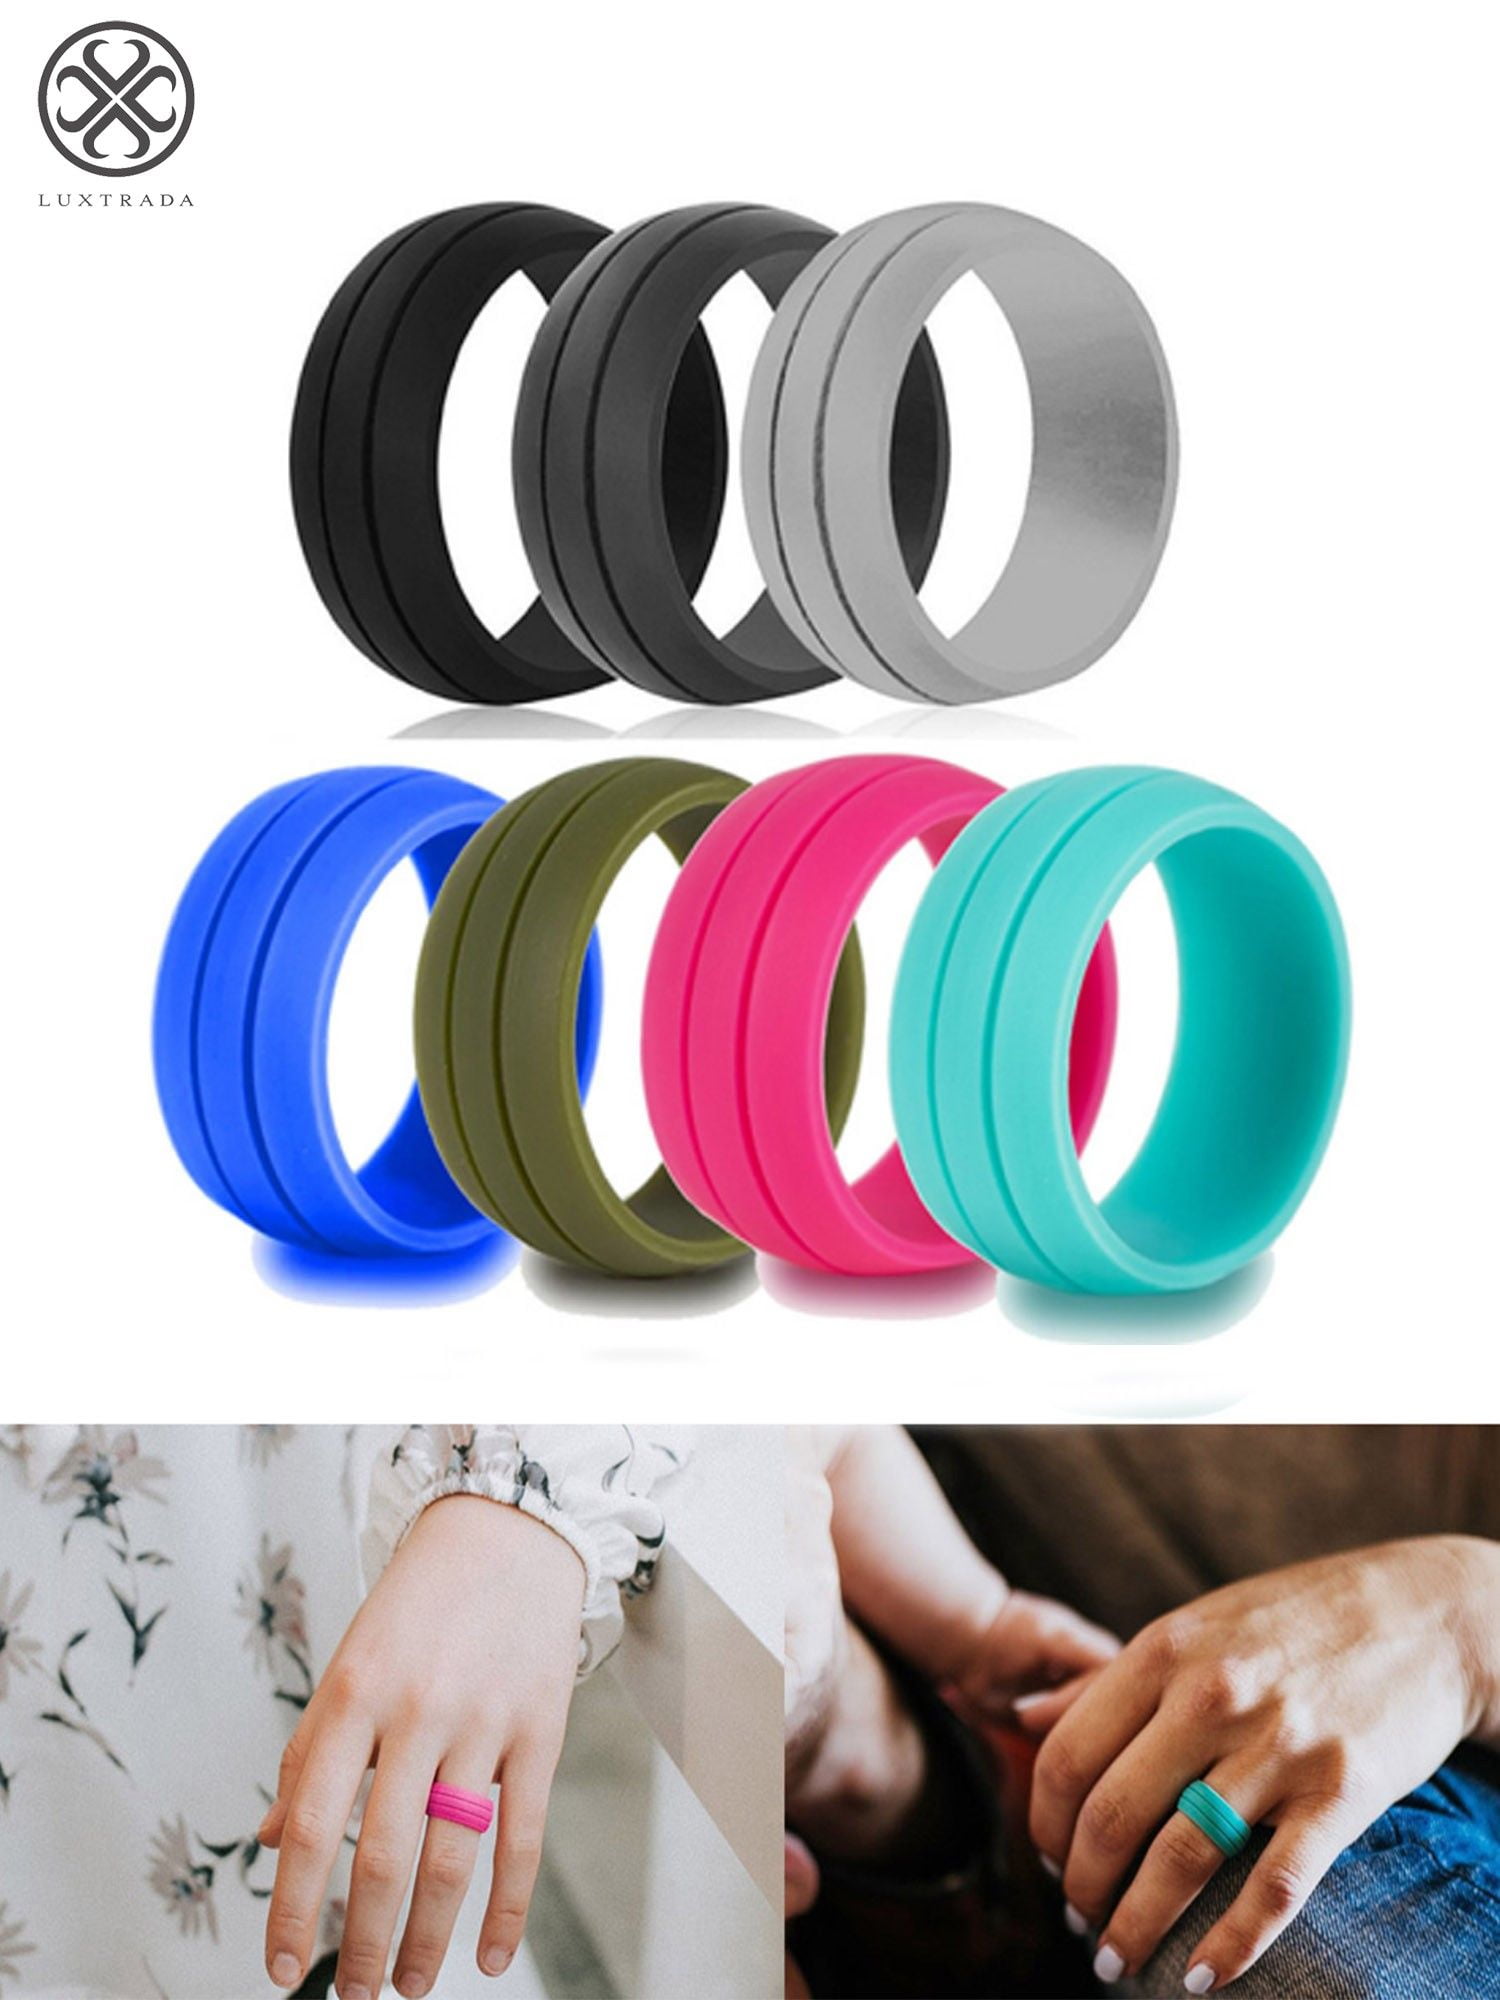 Details about  / Gaiam Fitness Rings S//M Size 6-8 3 Silicone Rings New In Box